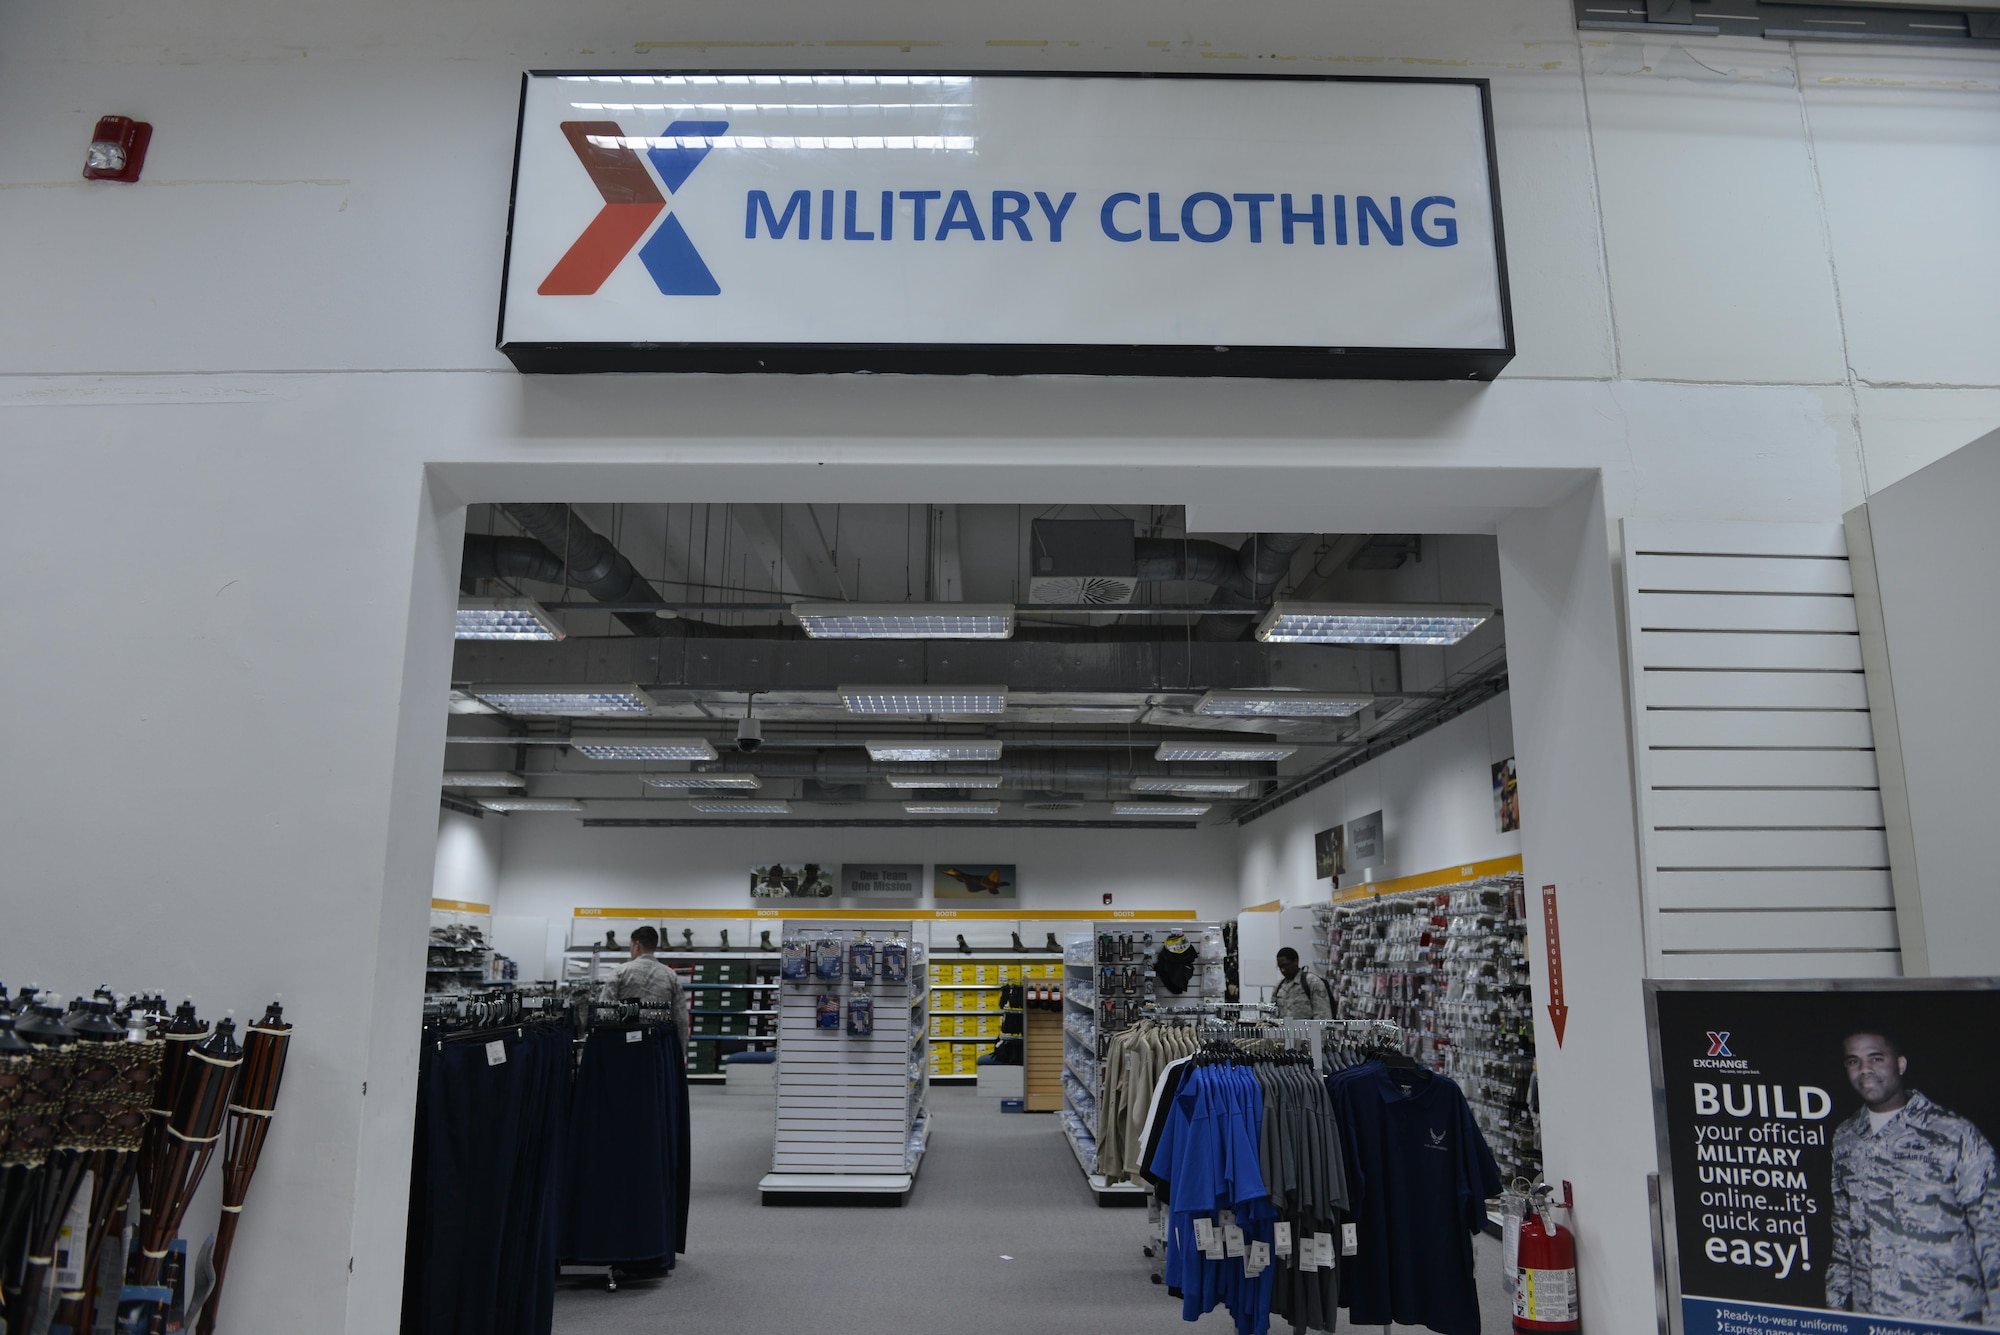 U.S. Airmen shop inside the military clothing section of the Exchange, April 12, 2017, at Incirlik Air Base, Turkey. The section was moved to provide a larger shopping environment. (U.S. Air Force photo by Senior Airman John Nieves Camacho)